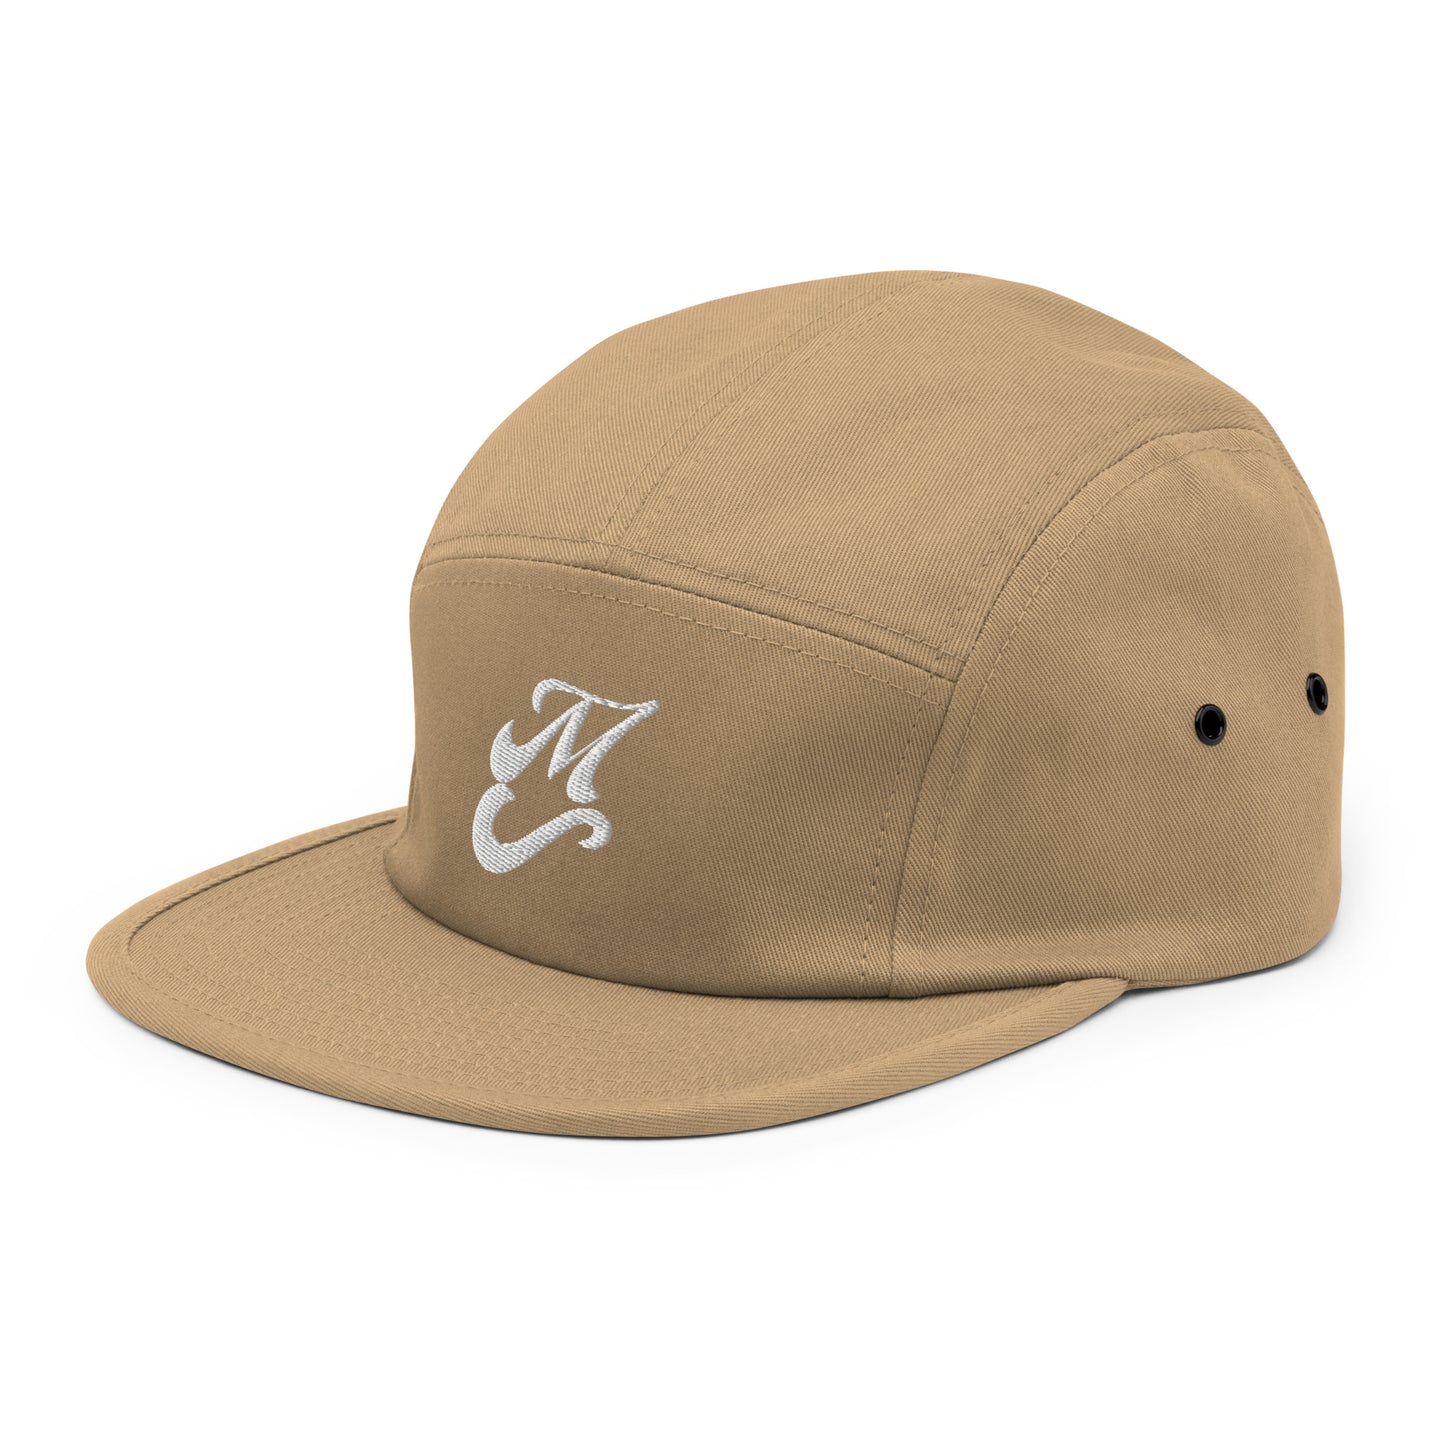 MS Logo 5 panel embroidered hat men's and women's unisex